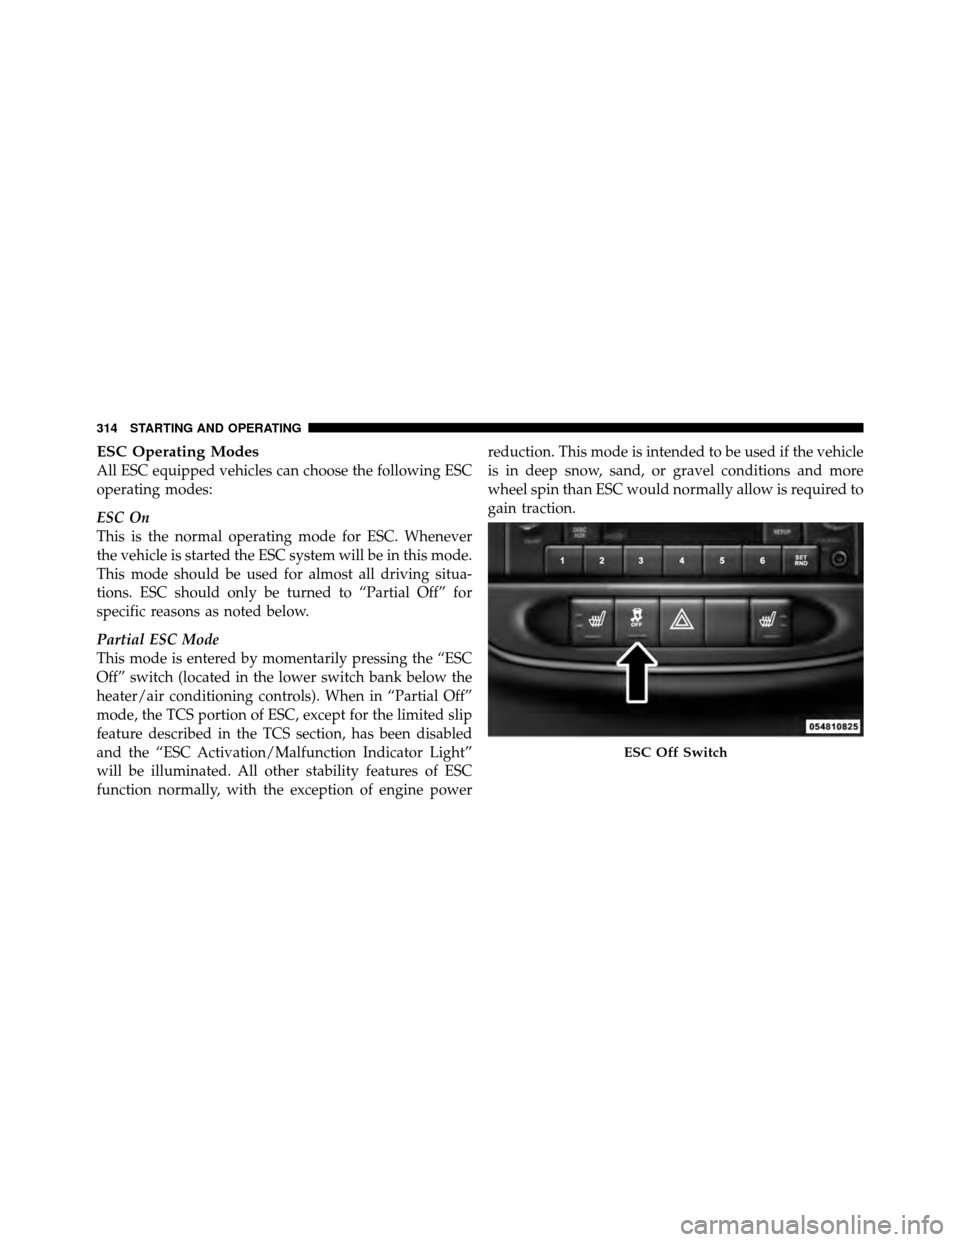 CHRYSLER 200 2011 1.G Owners Manual ESC Operating Modes
All ESC equipped vehicles can choose the following ESC
operating modes:
ESC On
This is the normal operating mode for ESC. Whenever
the vehicle is started the ESC system will be in 